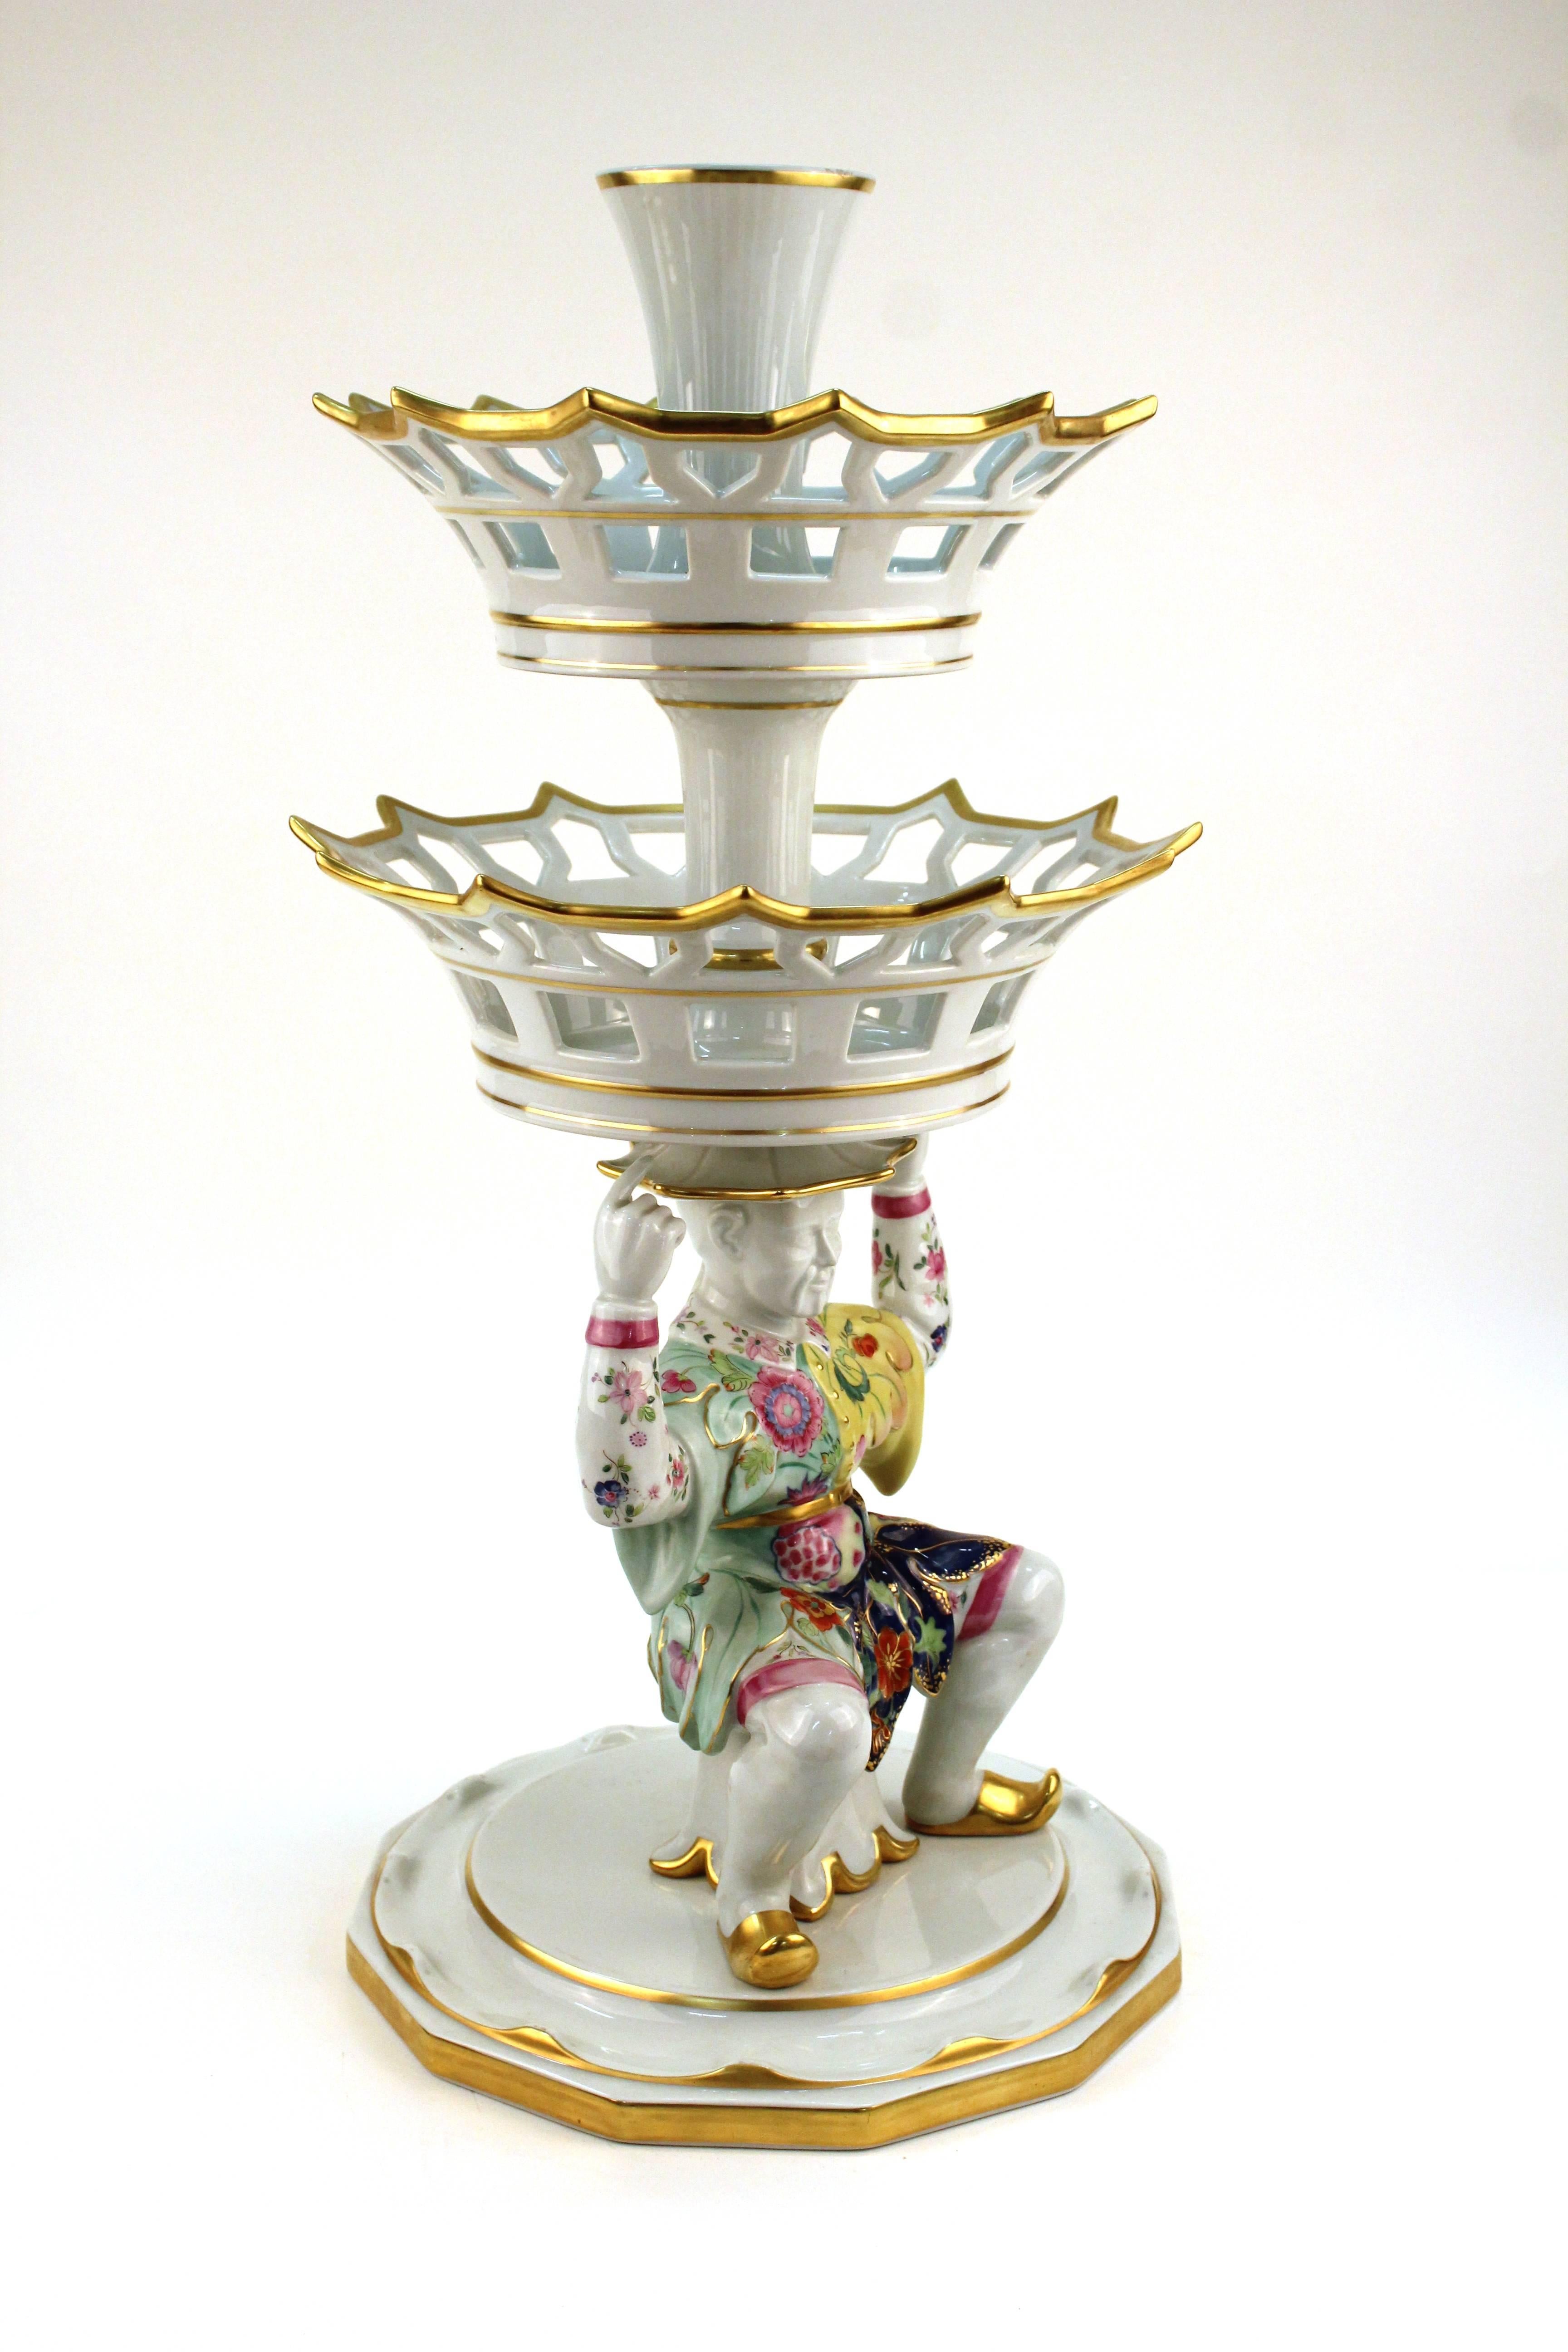 A multi-level epergne by Mottahedeh with a orientalist depiction of a Chinese man dressed in multicolored robes with the tobacco leaf motif. Include two gold trimmed baskets and several original labels. Hallmarks on the bottom of the base.